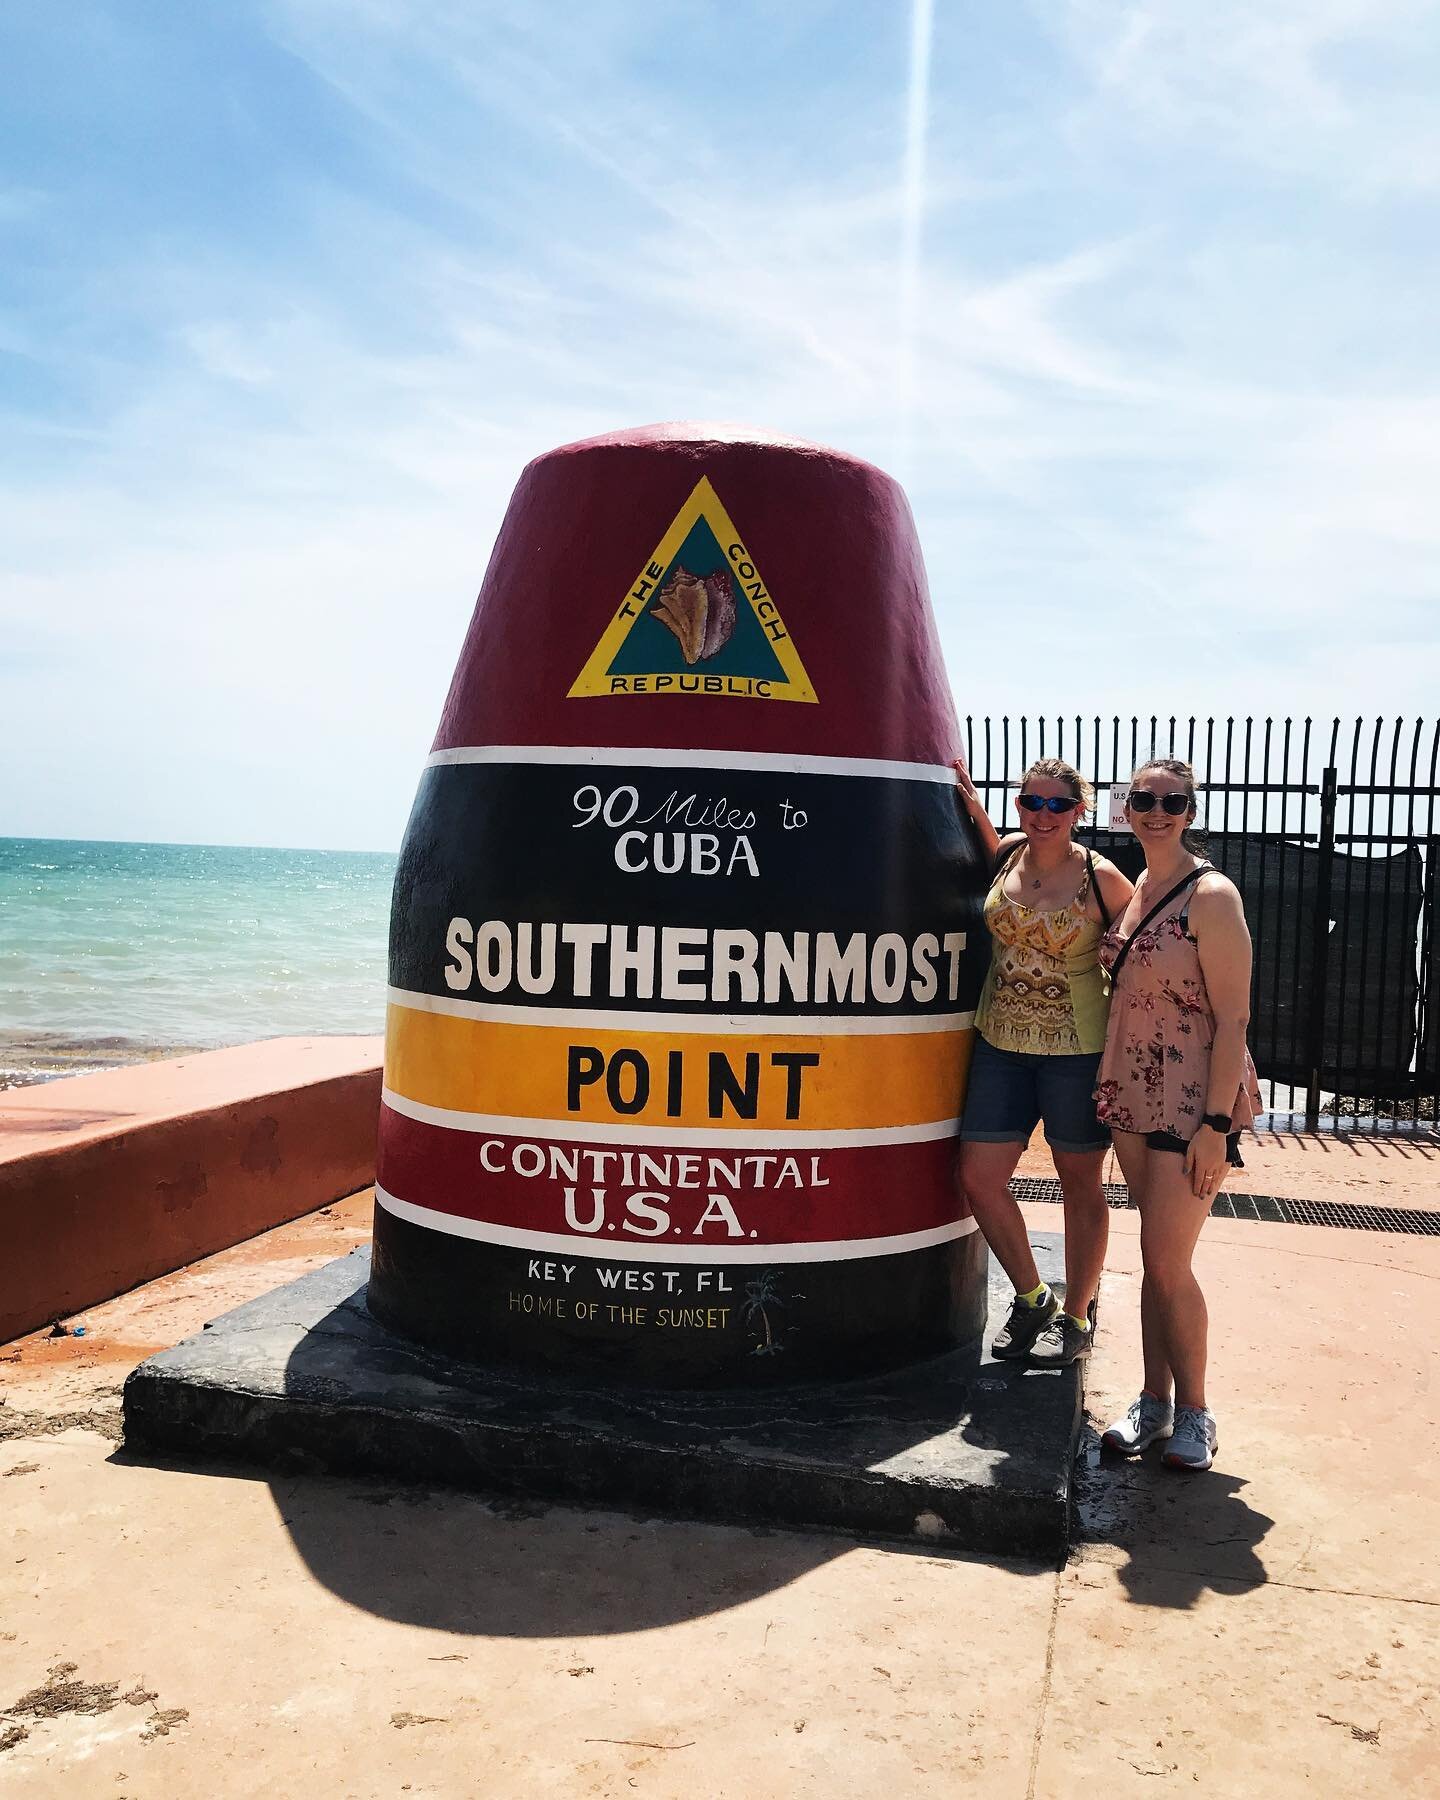 *Actually it&rsquo;s 93 miles&hellip; or so I&rsquo;ve been told 🤣
.
.
.
.
.
#southernmostpoint #floridakeys #beachvacation